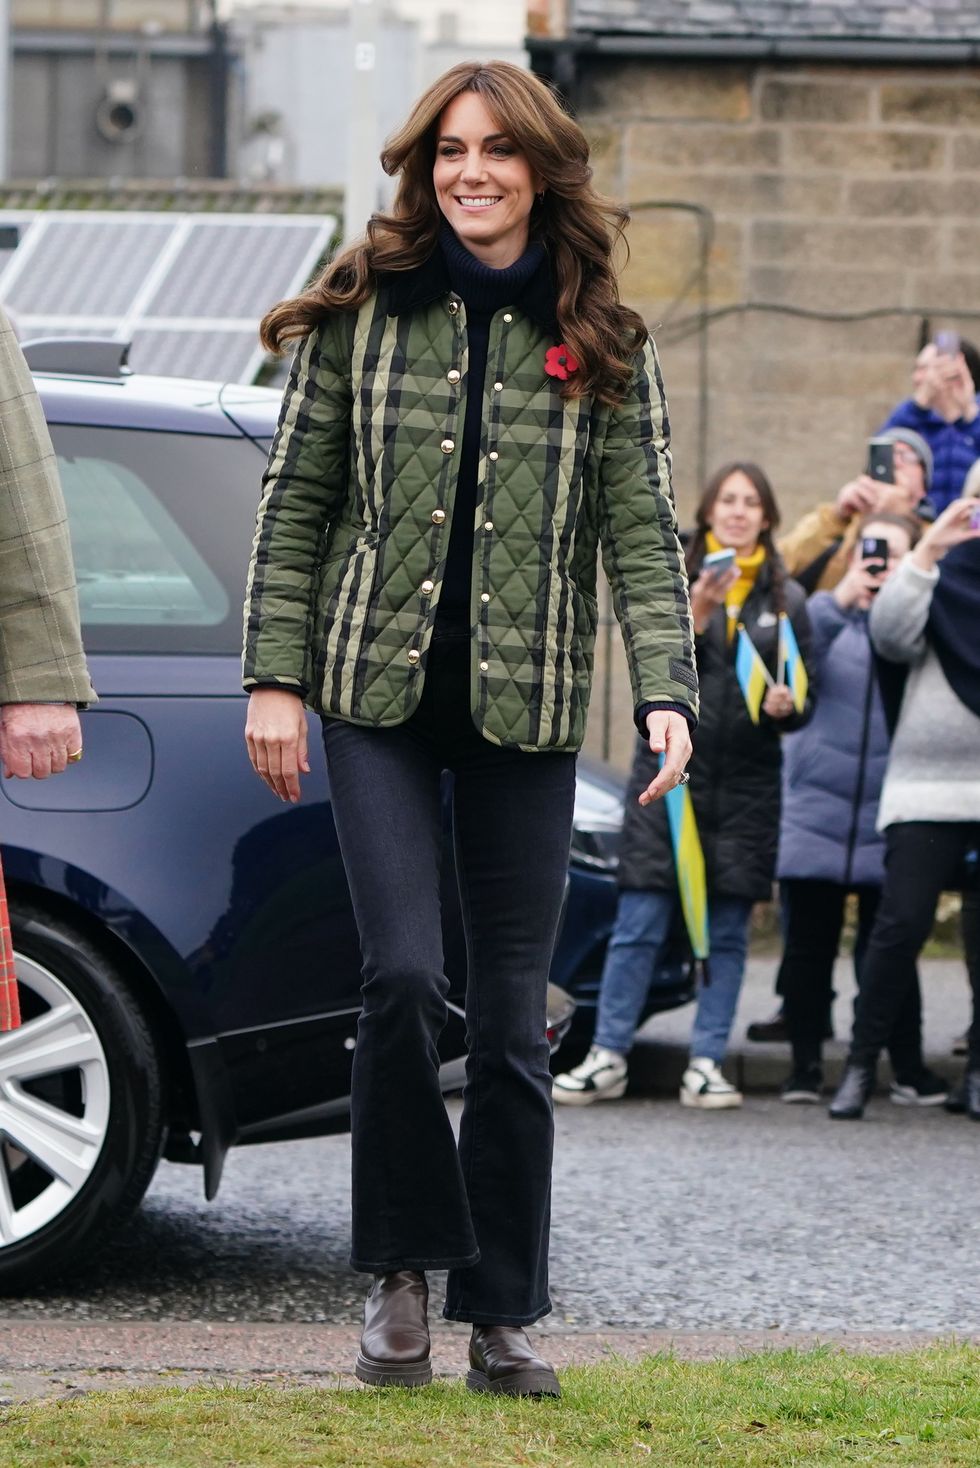 the duke and duchess of rothesay visit scotland